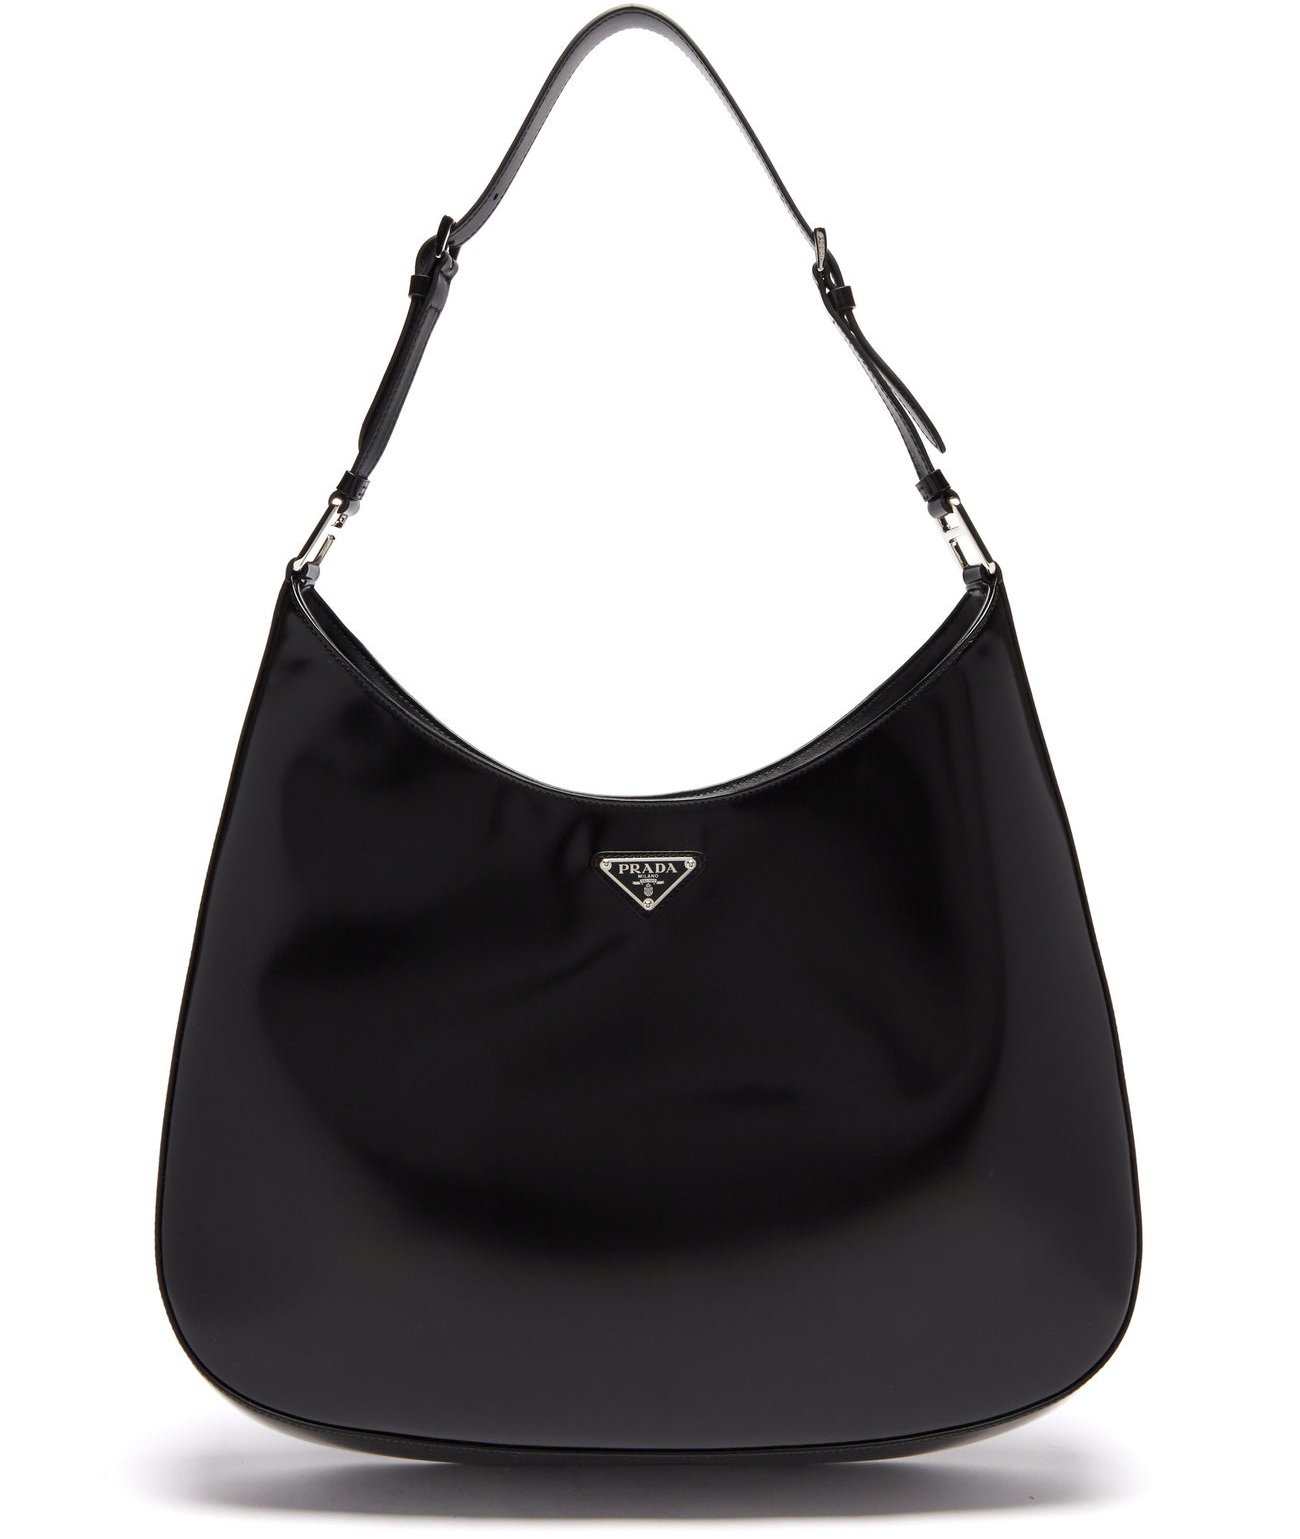 Sleek curved lines give the Cleo bag's modern rounded silhouette a soft and light look